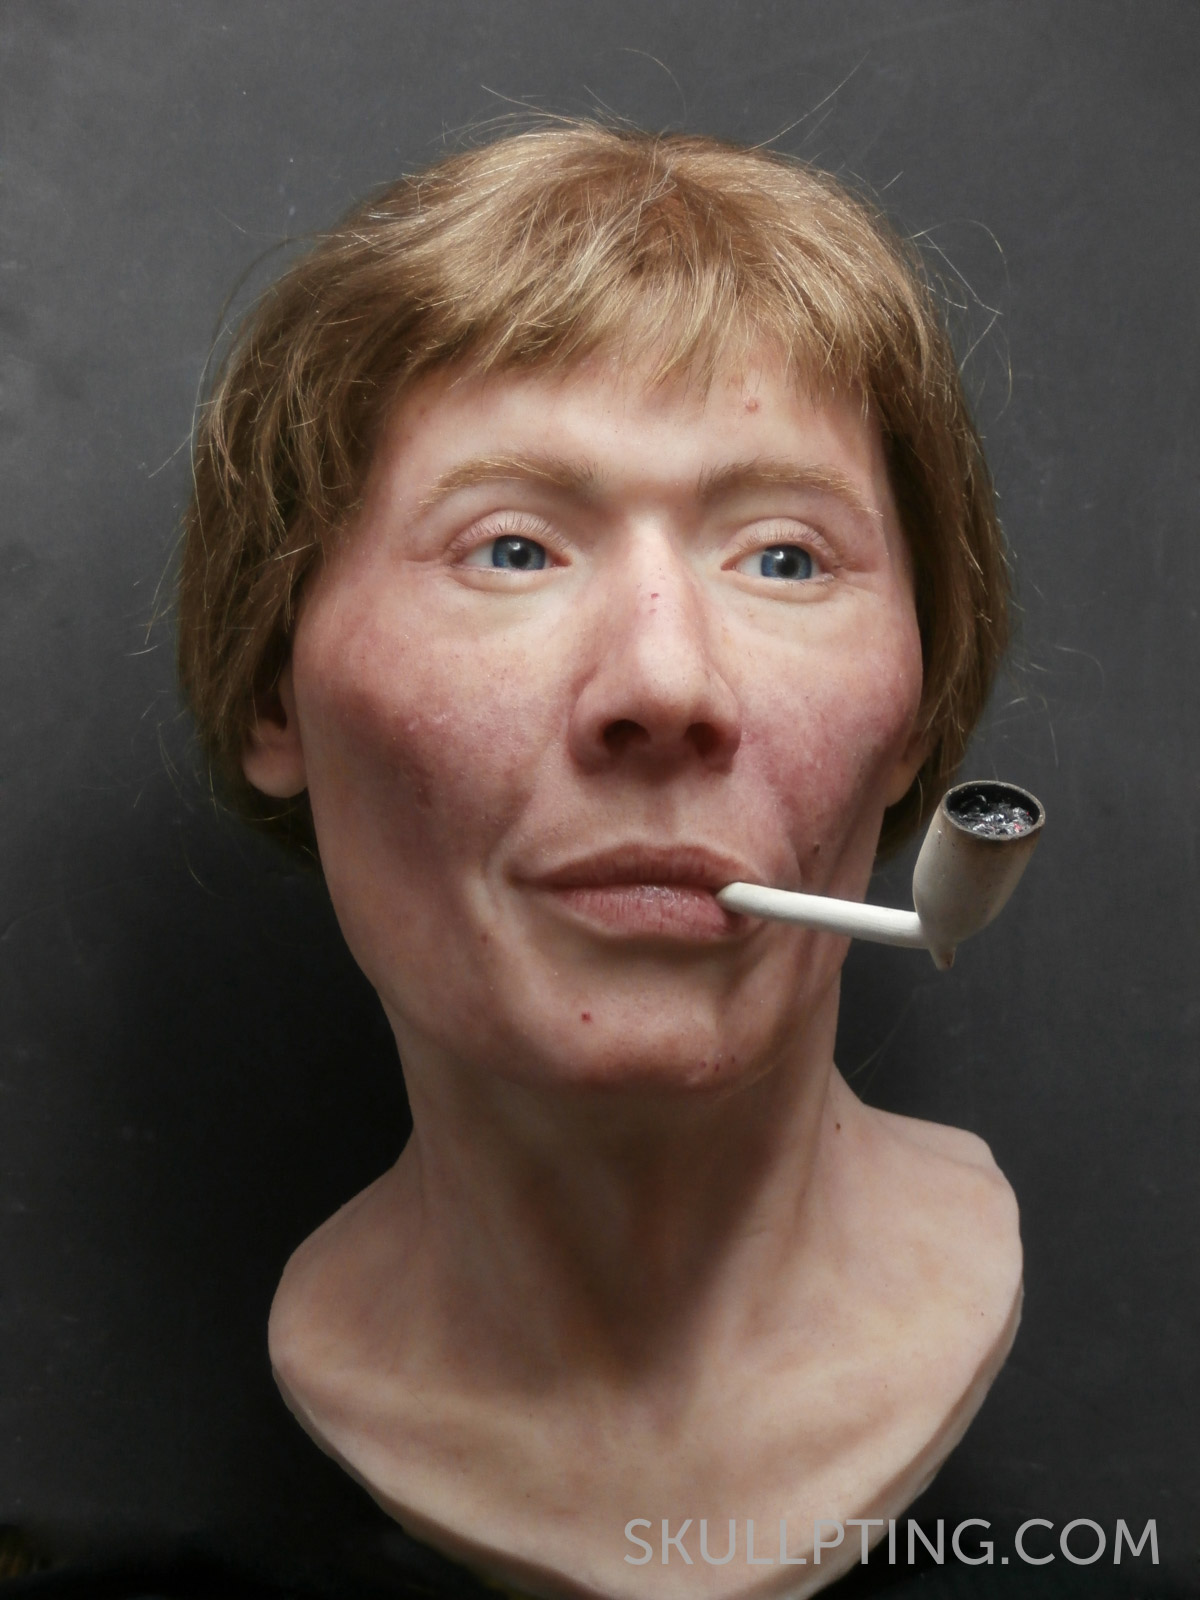 The finished facial reconstruction.